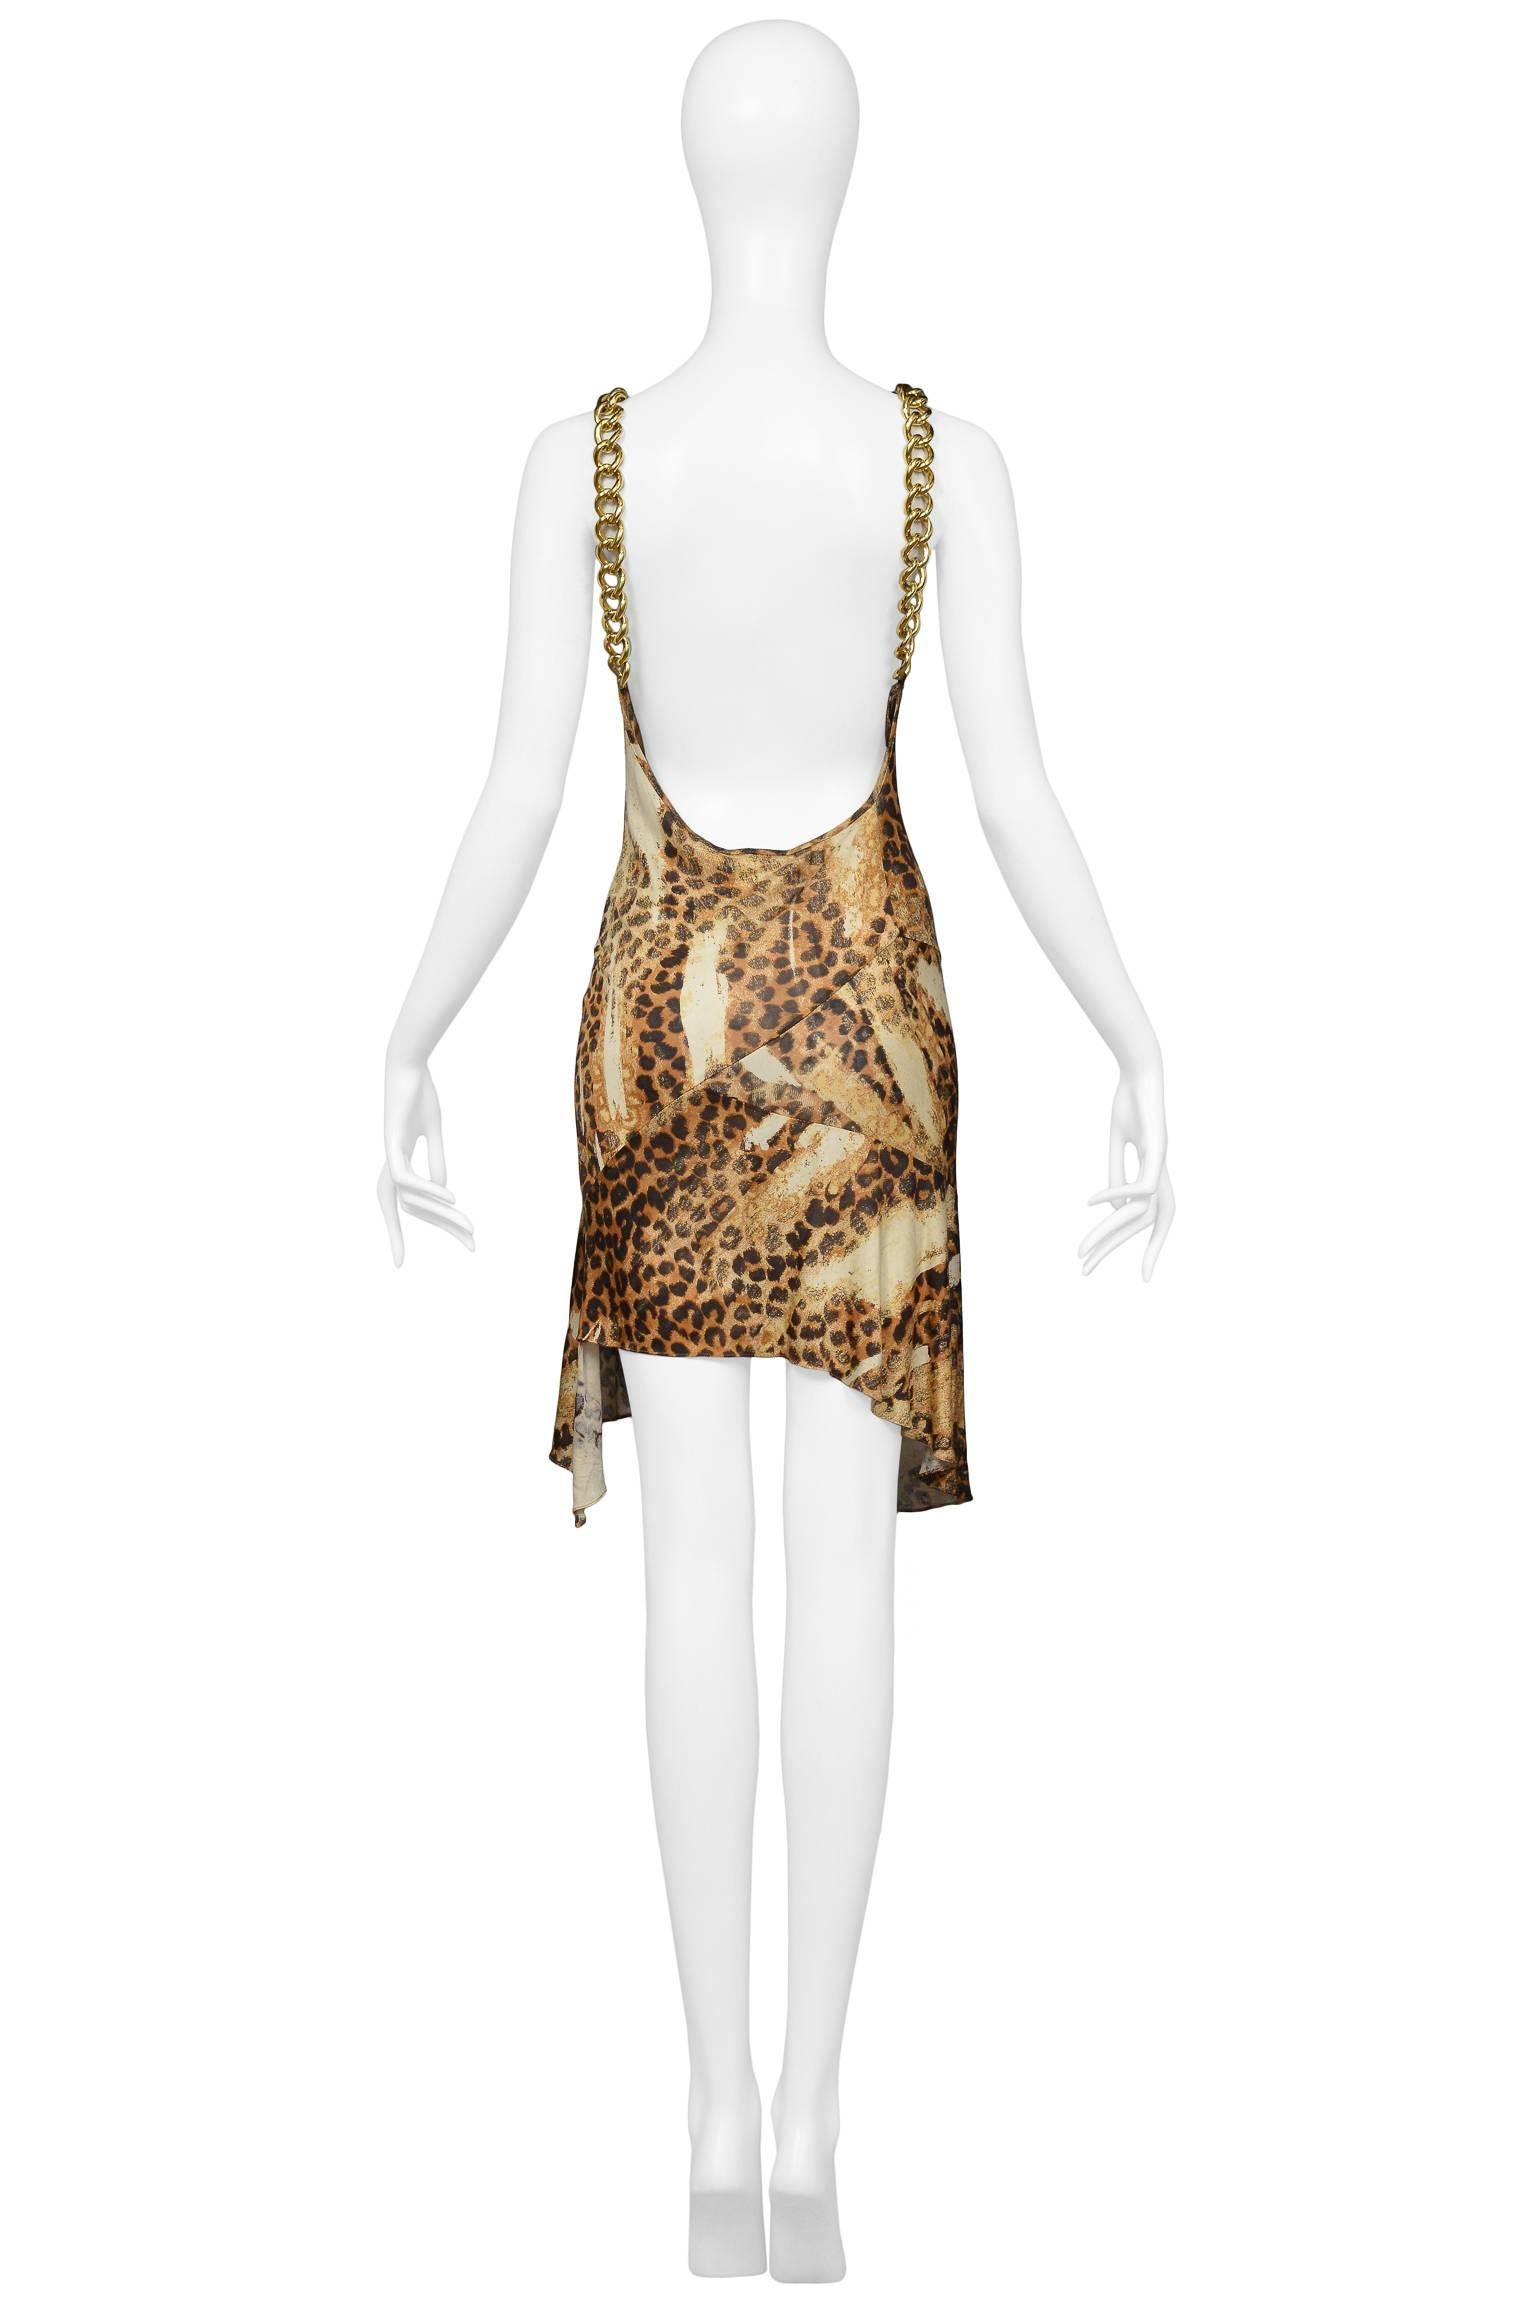 Iconic Dior By Galliano Gold Chain & ID Logo Necklace Leopard Dress Runway 2000 In Excellent Condition In Los Angeles, CA